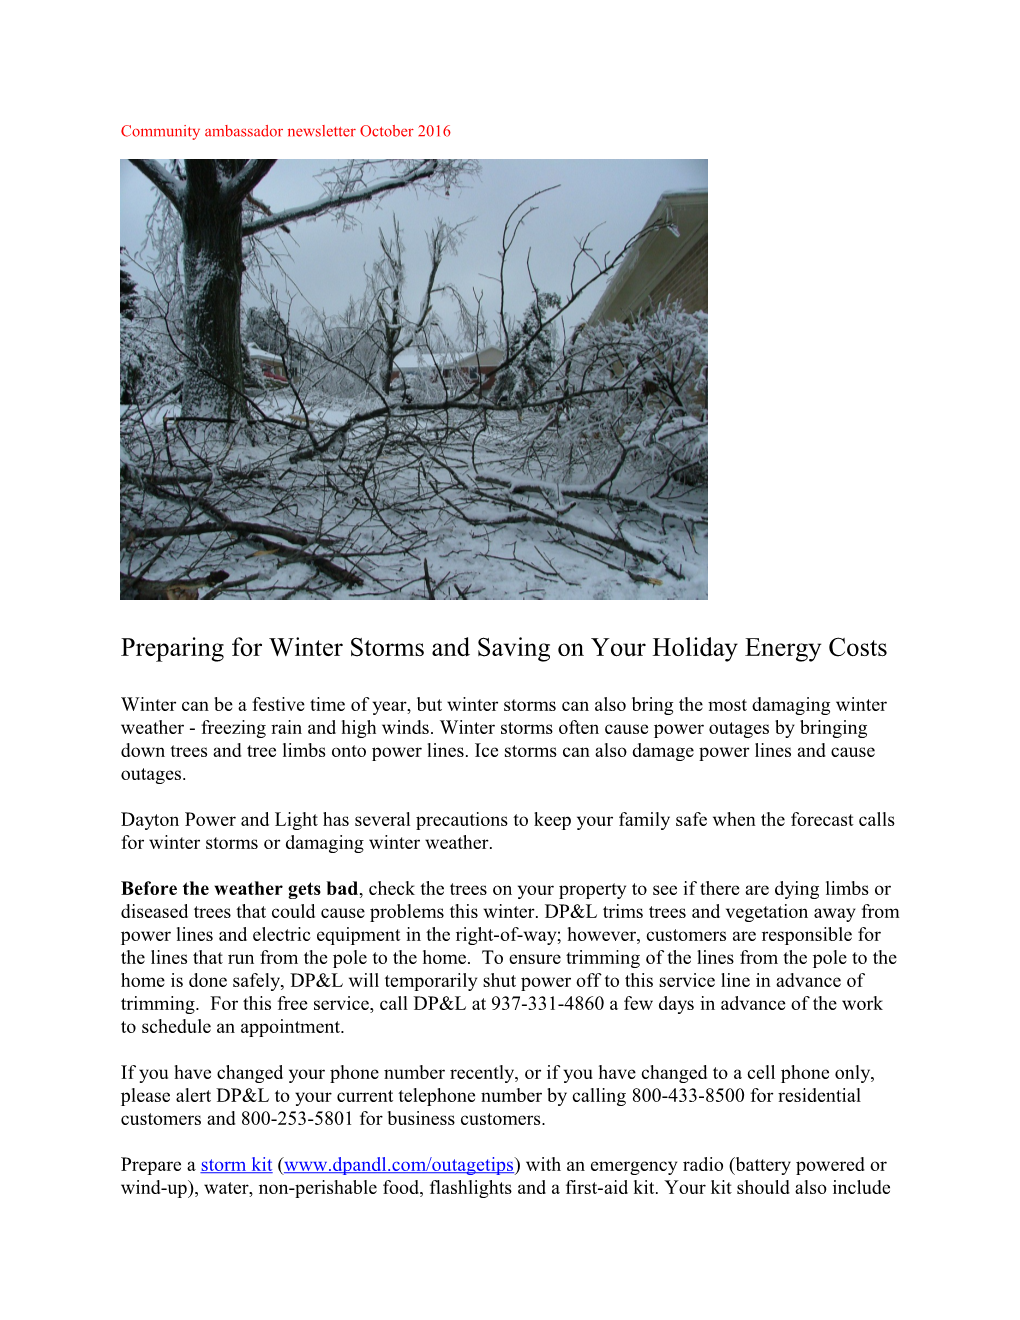 Preparing for Winter Storms and Saving on Your Holiday Energy Costs